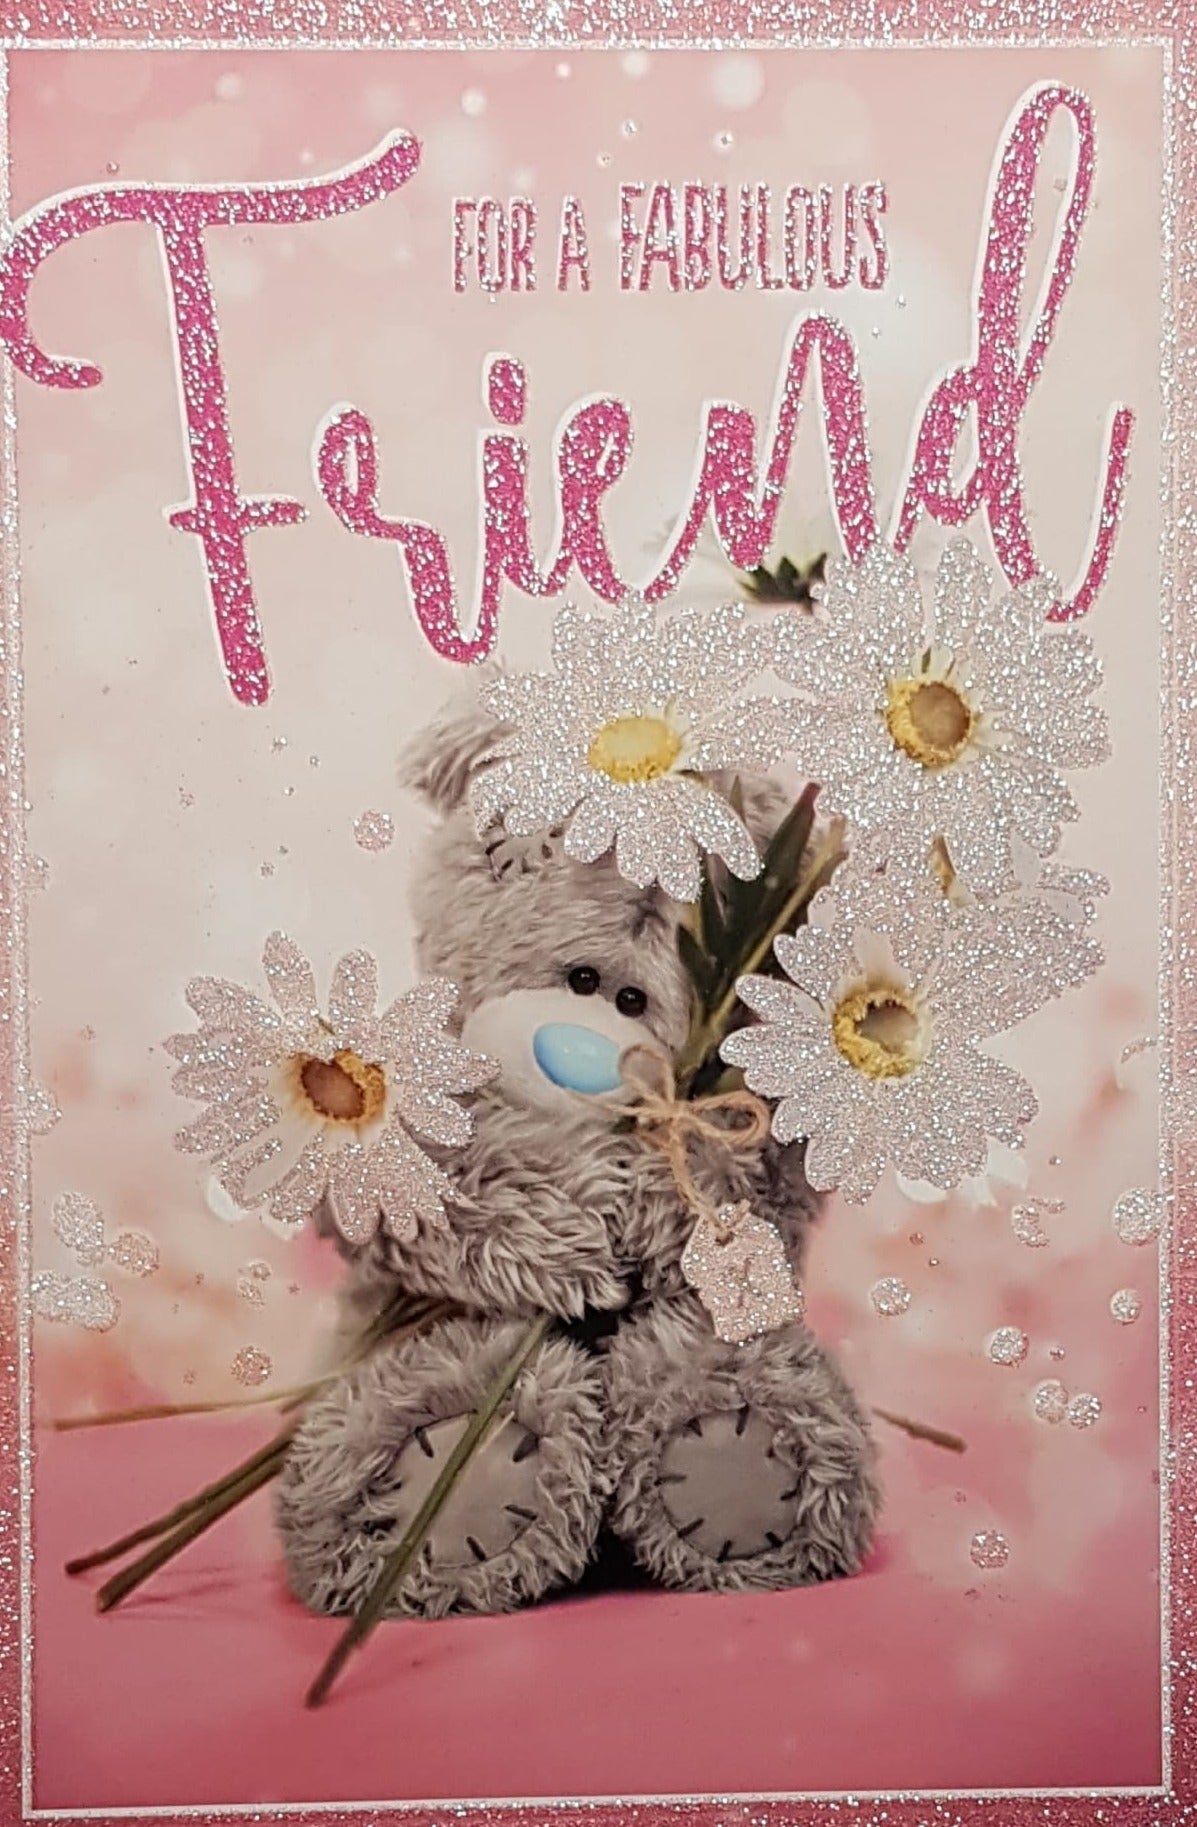 Birthday Card - Friend / Teddy Holding Giant Daisies & A Pink Sparkly Font